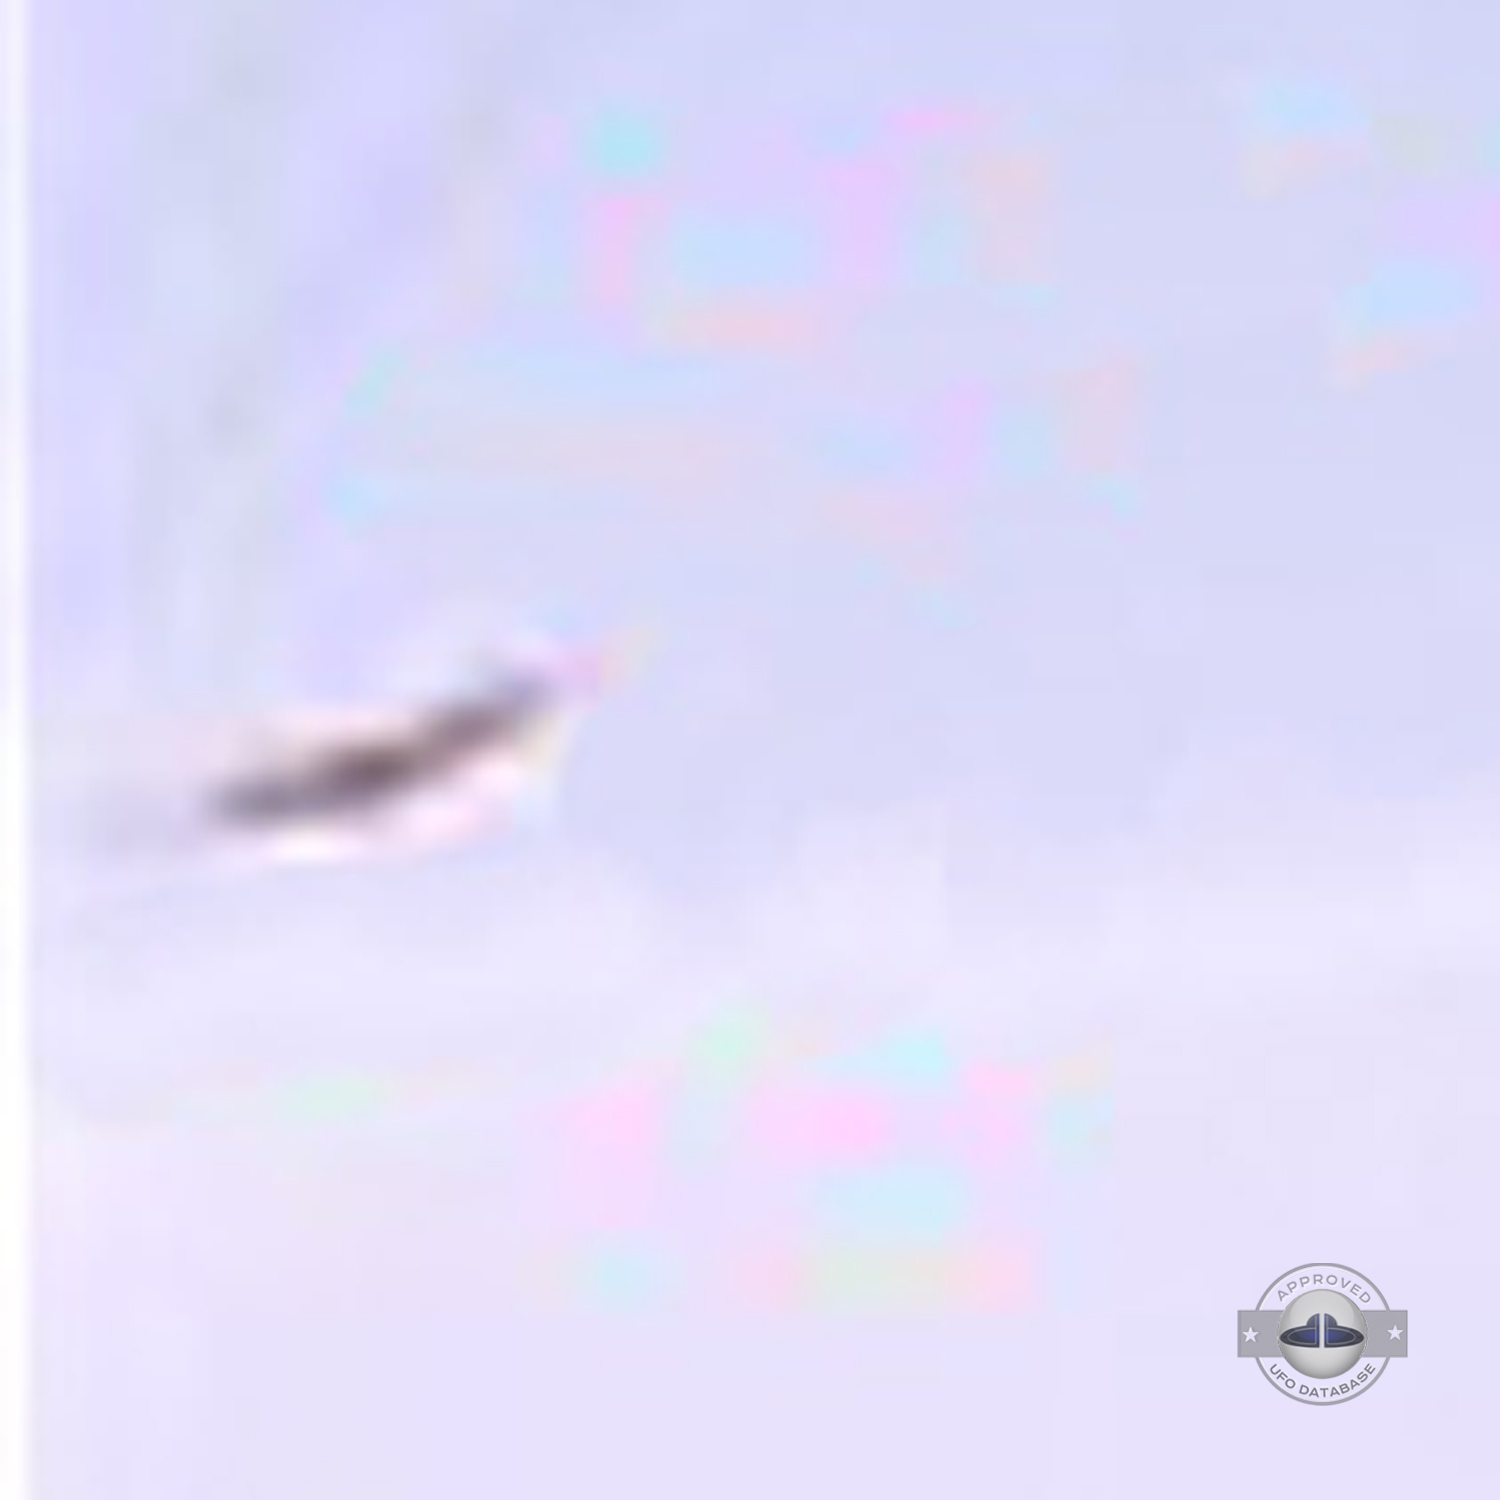 UFO seen passing over Kids in Baghdad, Iraq | April 03 2004 UFO Picture #199-4